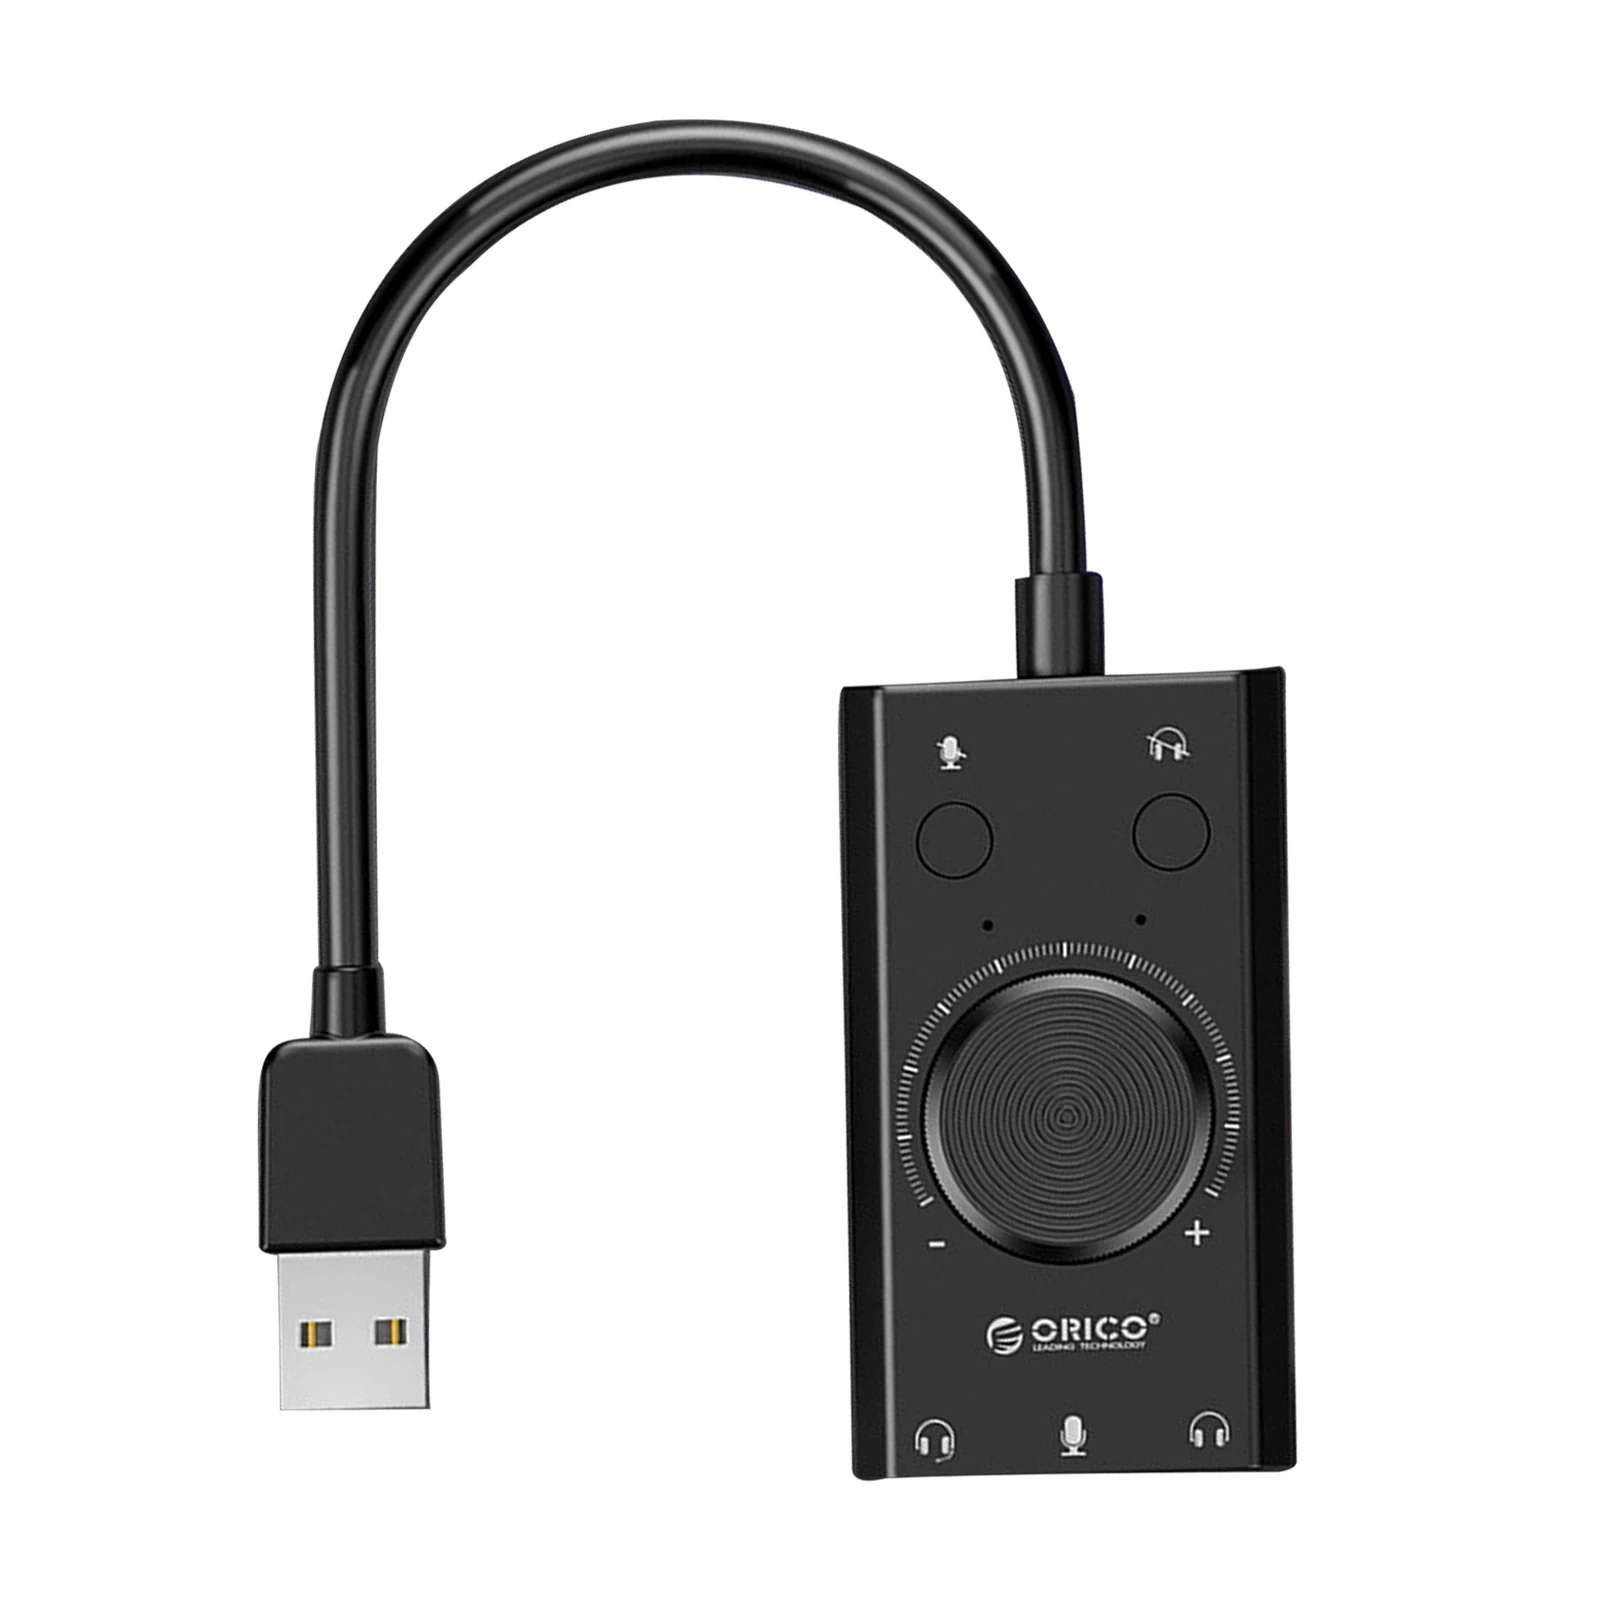 

External USB Sound Card Stereo Mic Speaker Headset Audio Jack 3.5mm Cable Adapter Mute Switch Volume Adjustment Free Drive